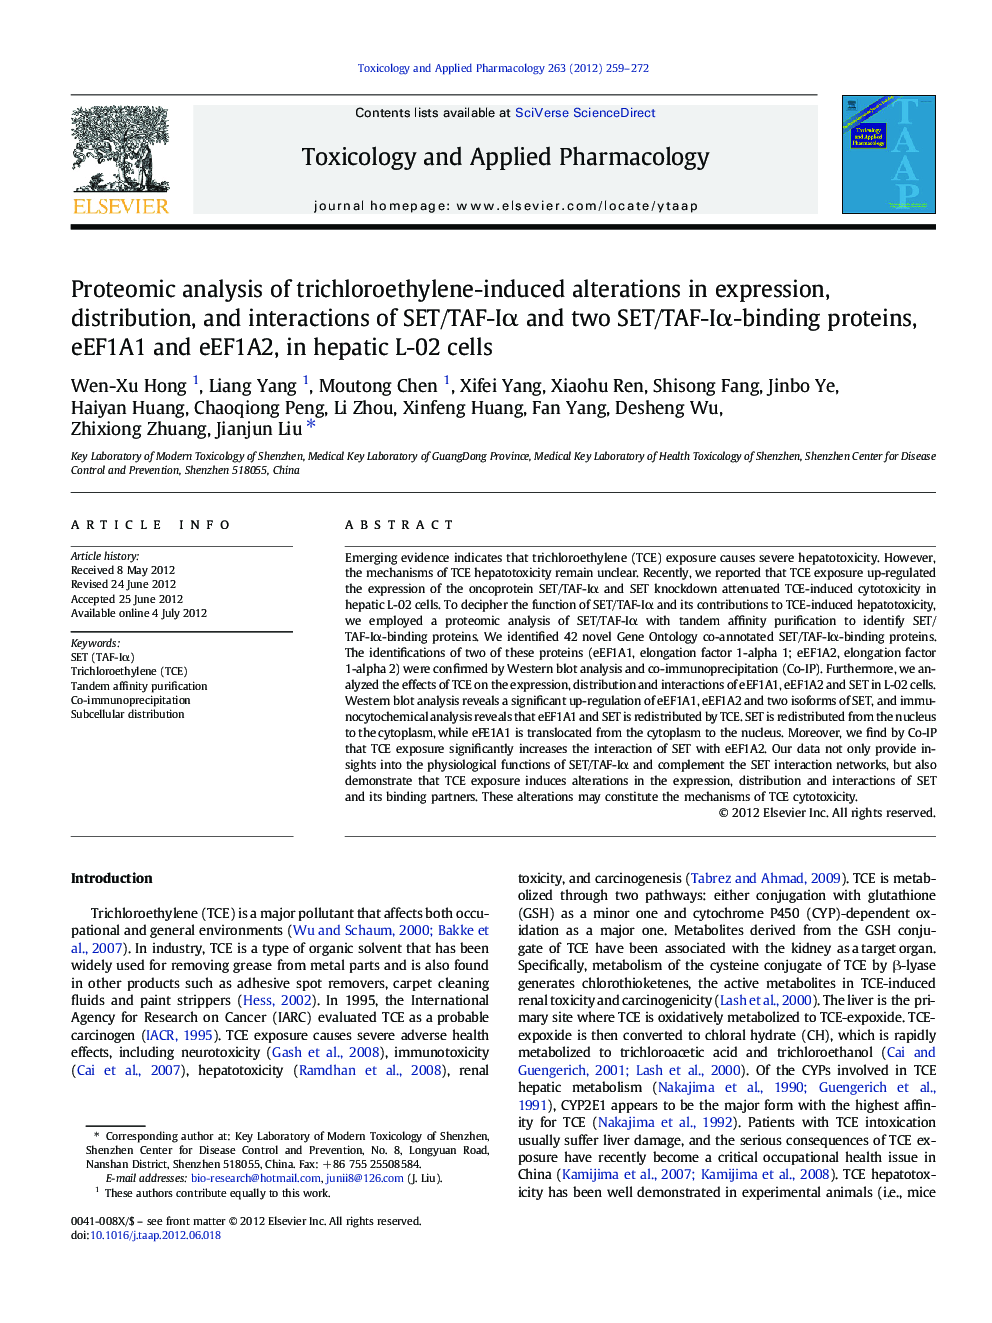 Proteomic analysis of trichloroethylene-induced alterations in expression, distribution, and interactions of SET/TAF-Iα and two SET/TAF-Iα-binding proteins, eEF1A1 and eEF1A2, in hepatic L-02 cells